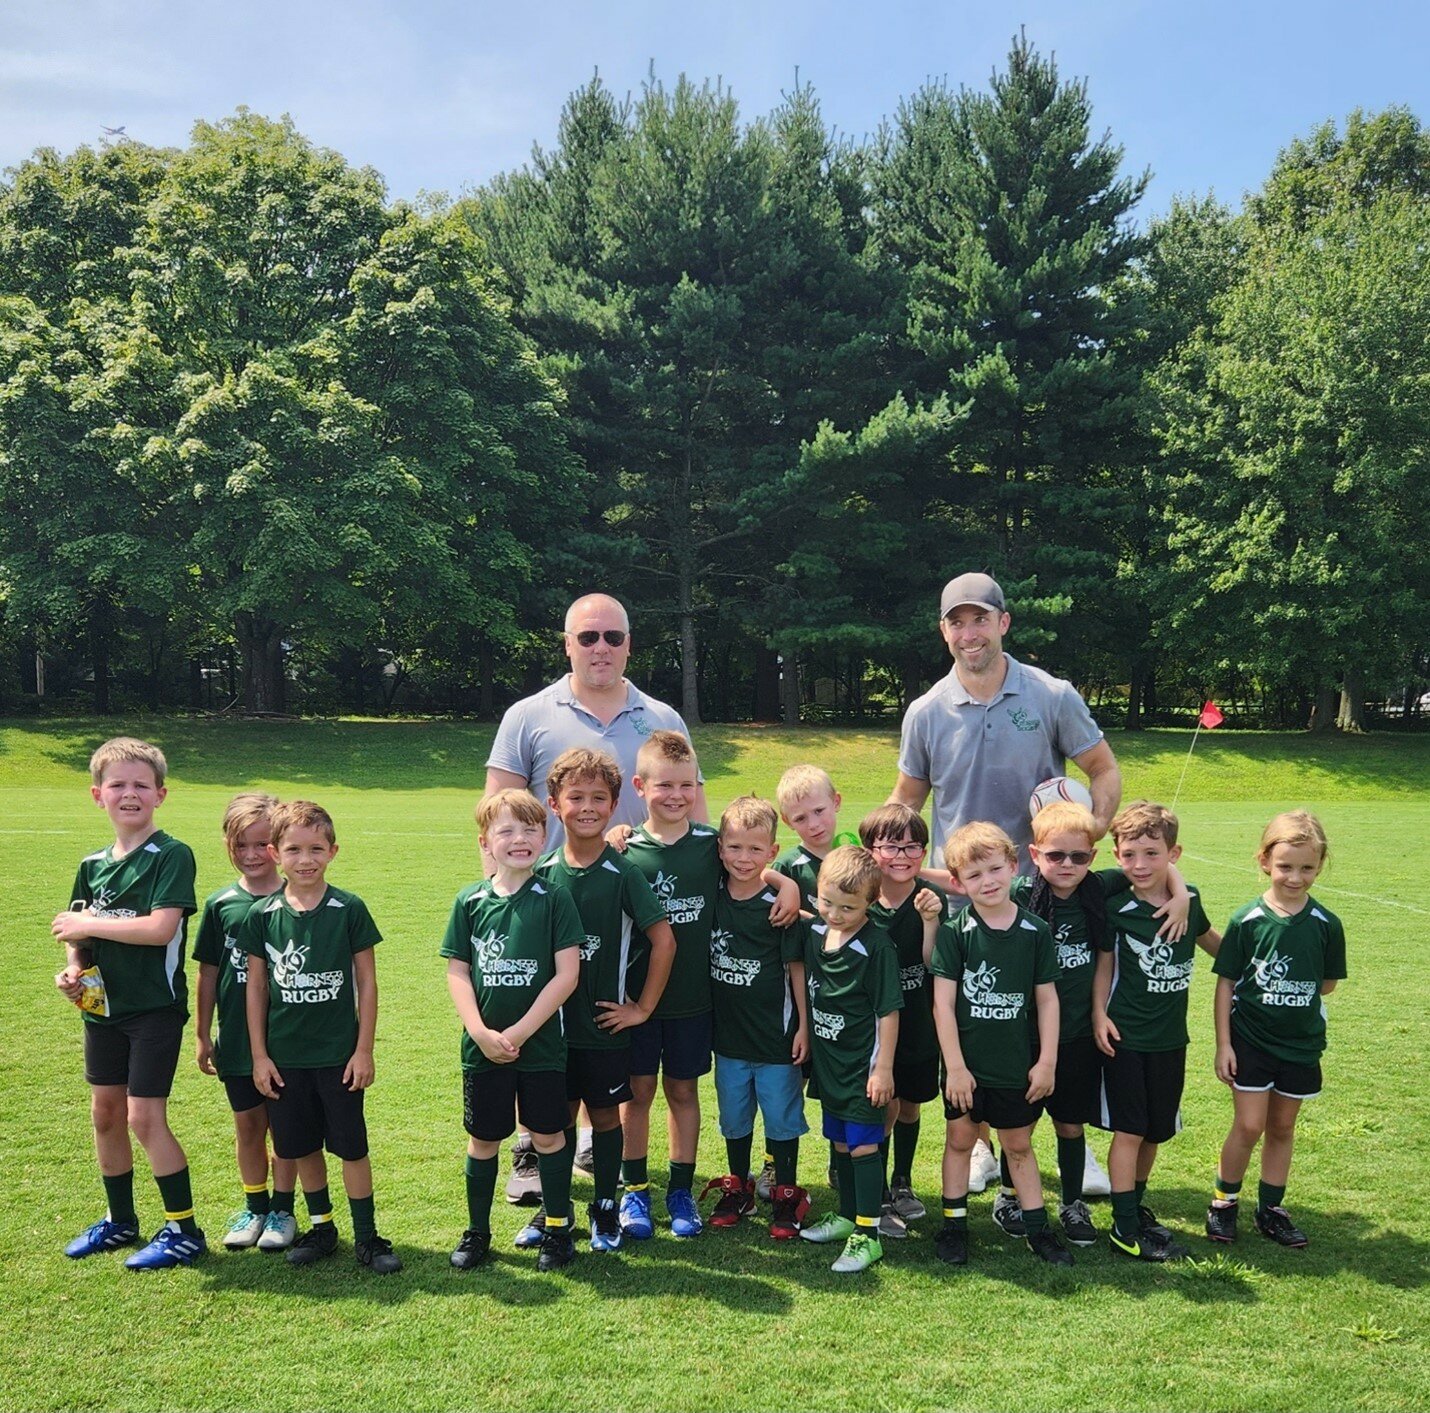 While there was no state championship at the U7 level, the team had a great season and tournament, winning most of their games.